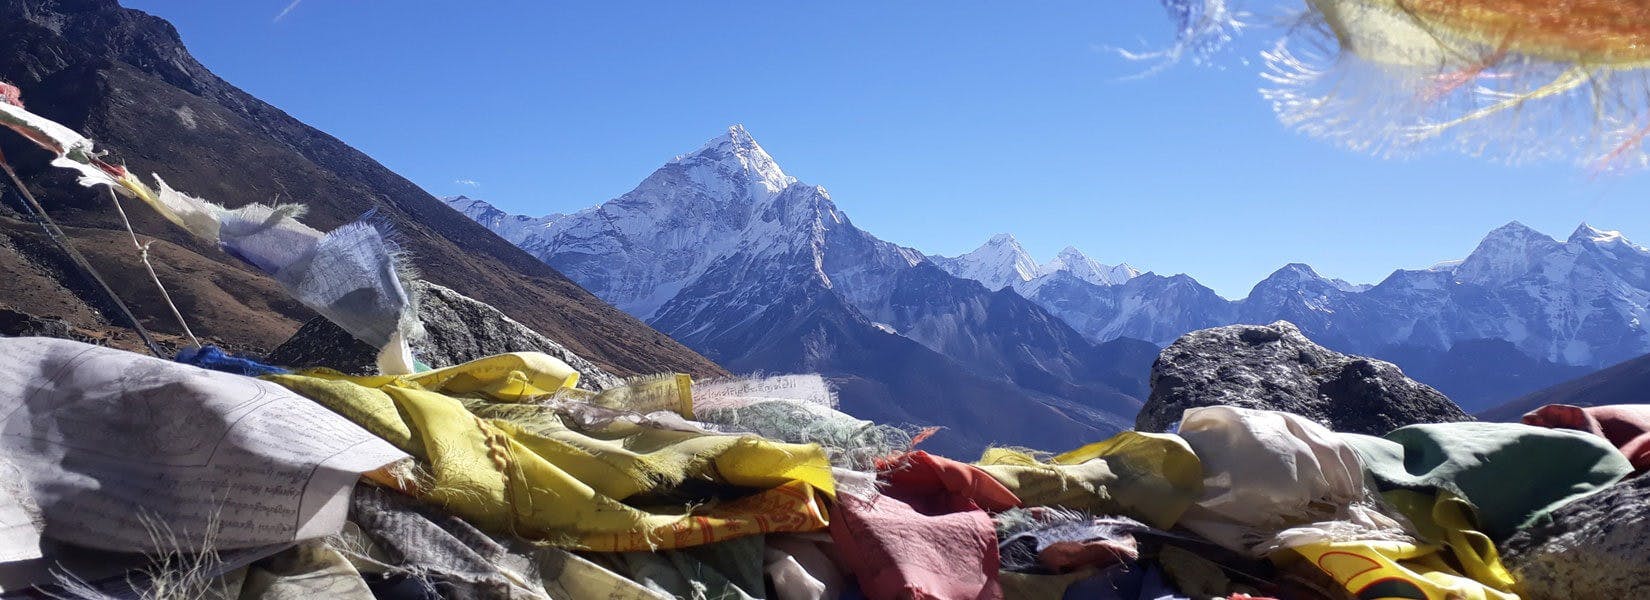 Top 6 famous trekking trails in the Everest region